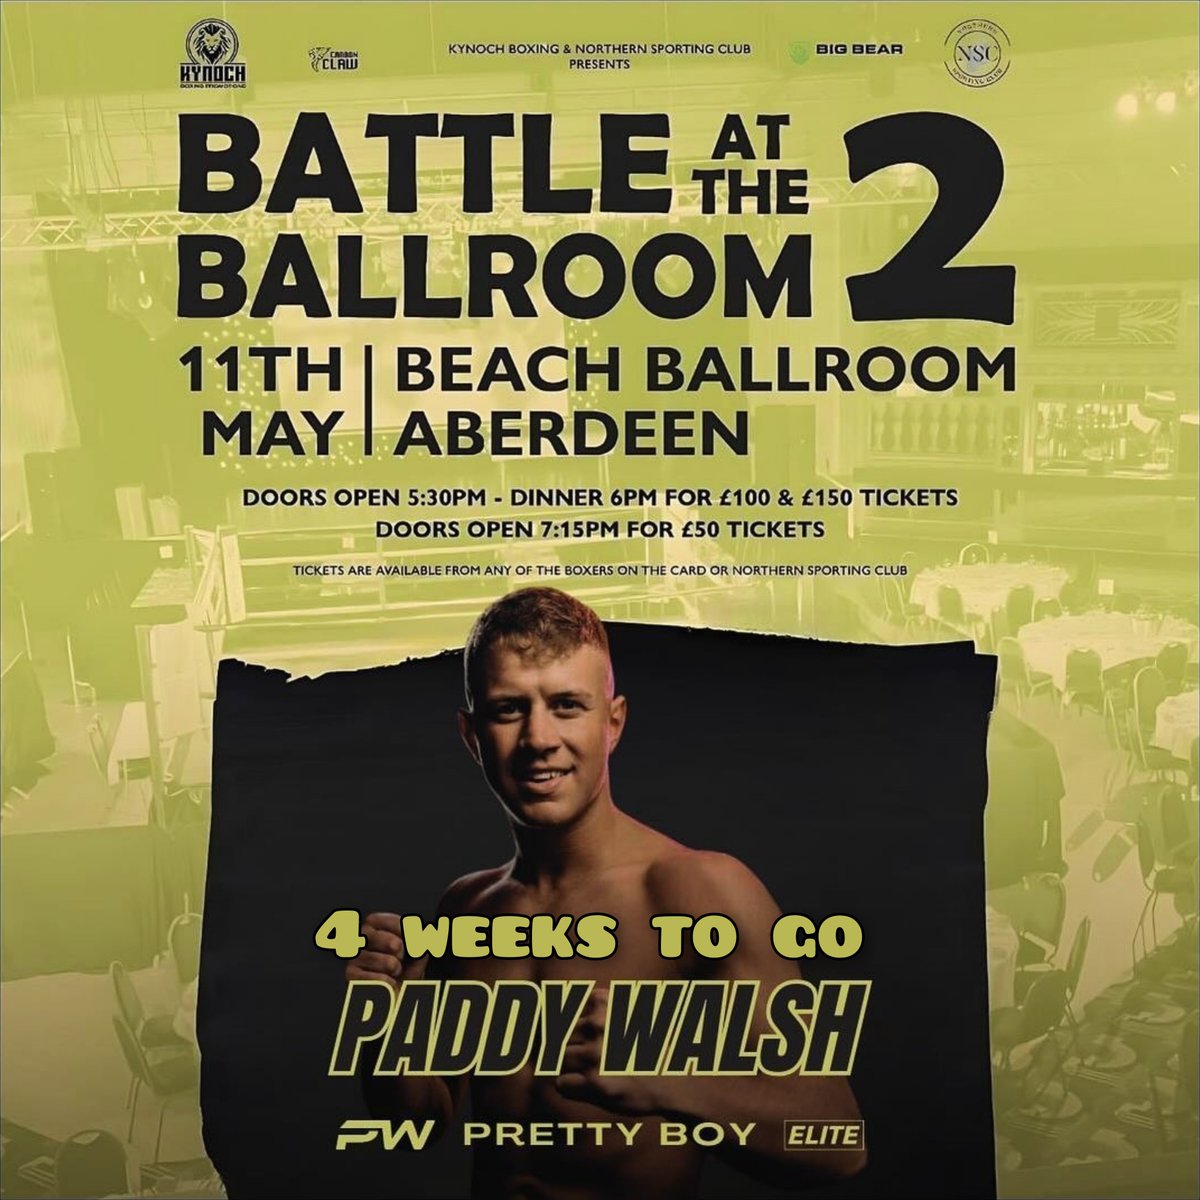 4 Weeks to go

Paddy Walsh returns for fight 5 as a pro 

Walsh (4-0) features on the @KynochBoxing 'Battle at the Ballroom' card in Aberdeen 

No opponent confirmed as yet